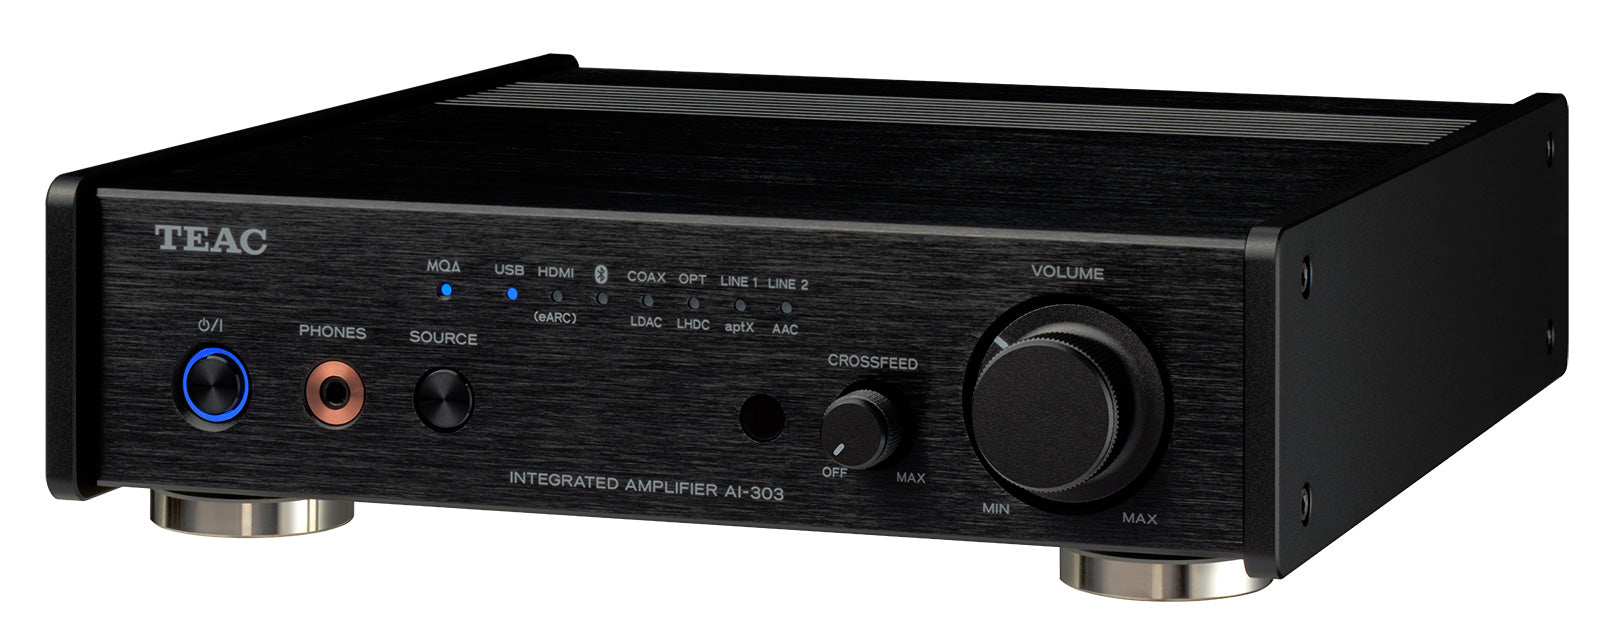 TEAC AI-303 USB DAC Safe Integrated and Black Sound — HQ Amplifier